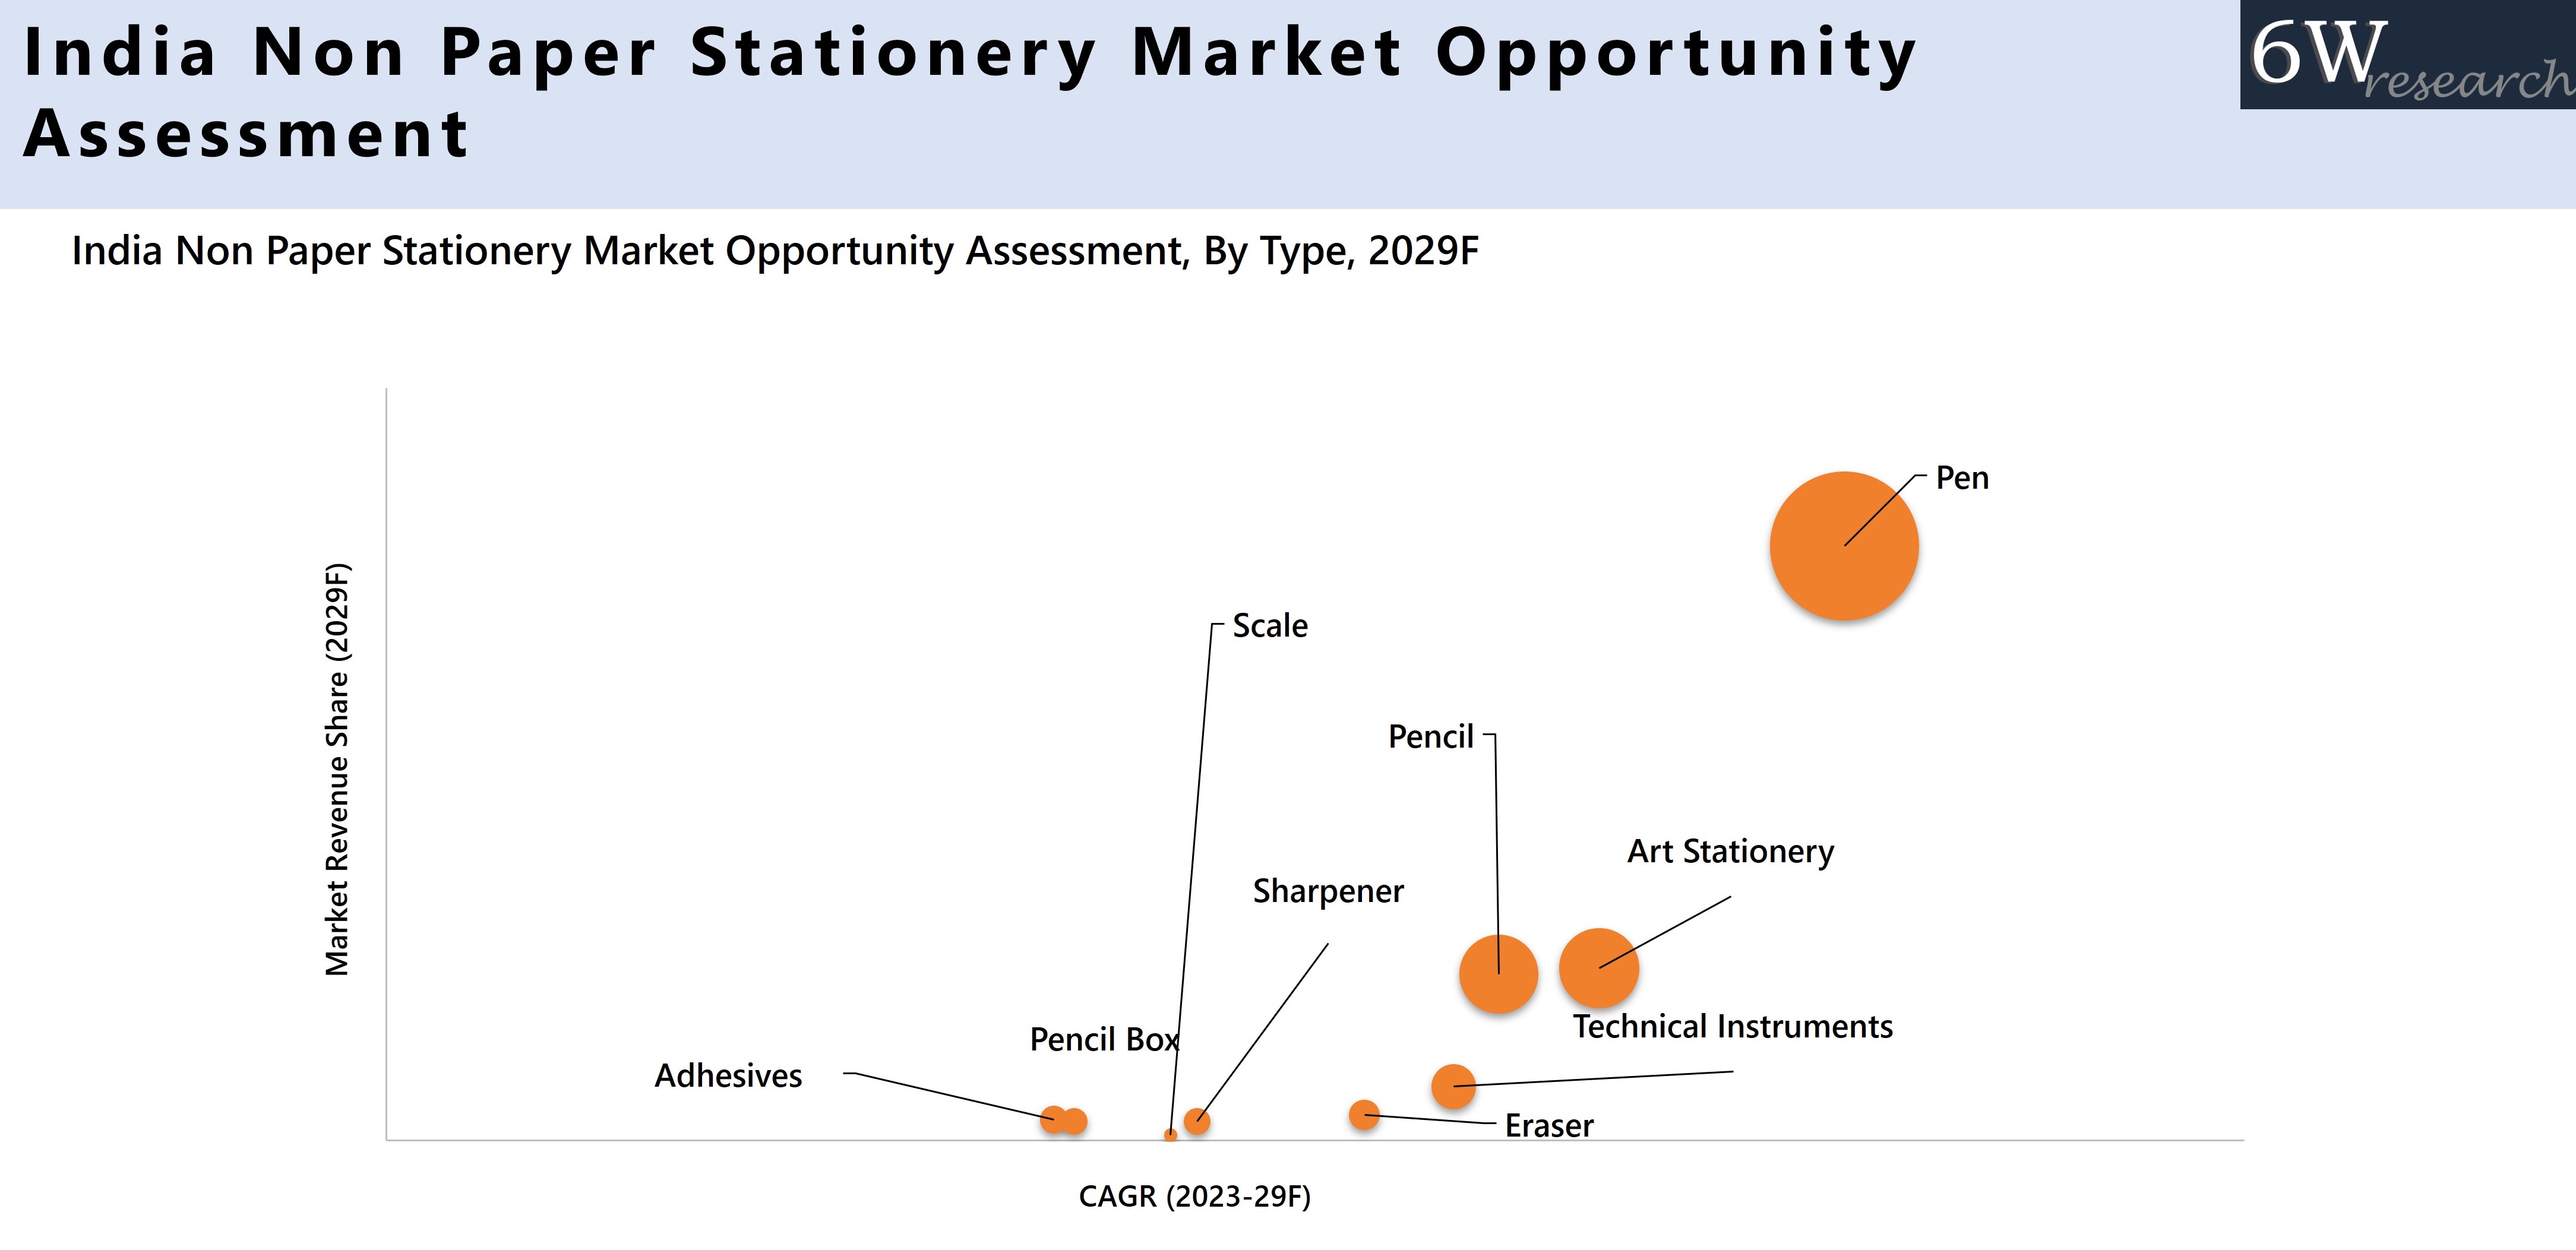 India Non Paper Stationery Market Opportunity Assessment